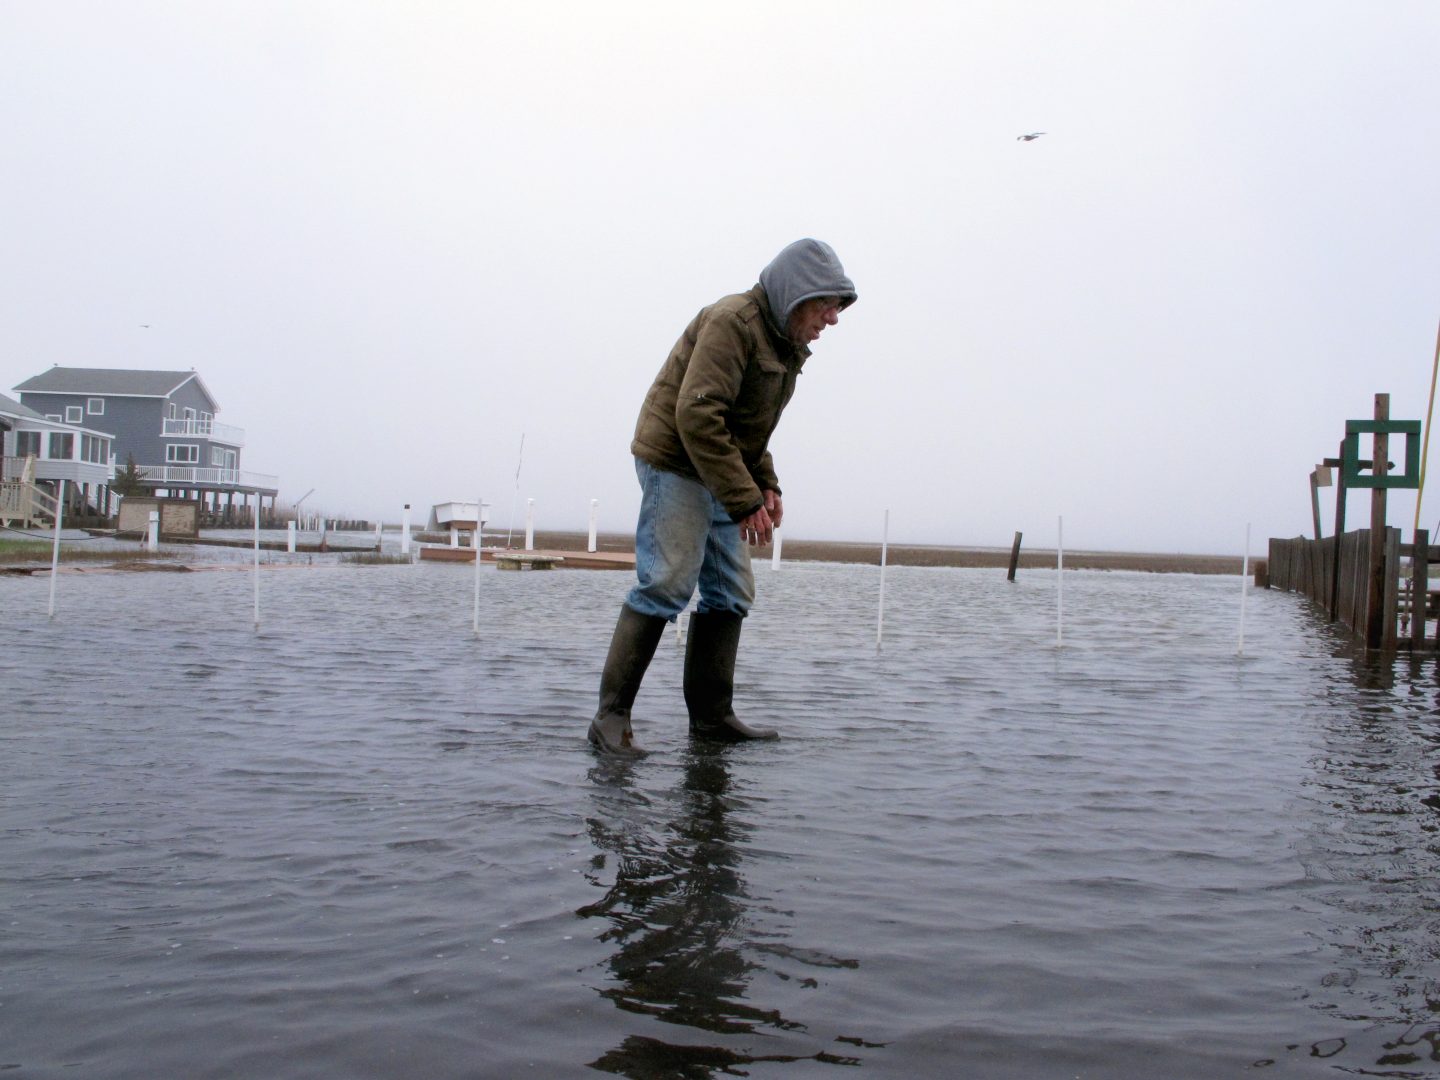 This April 26, 2017 photo shows Jim O'Neill walking through a flooded street in front of his home in Manahawkin N.J. after a moderate storm. He lives in a low-lying area near the Jersey shore, and is often affected by back bay flooding, a type of recurring nuisance flooding that's affecting millions of Americans and which experts agree has not been as widely addressed as oceanfront flooding, in part because potential solutions are much more difficult.